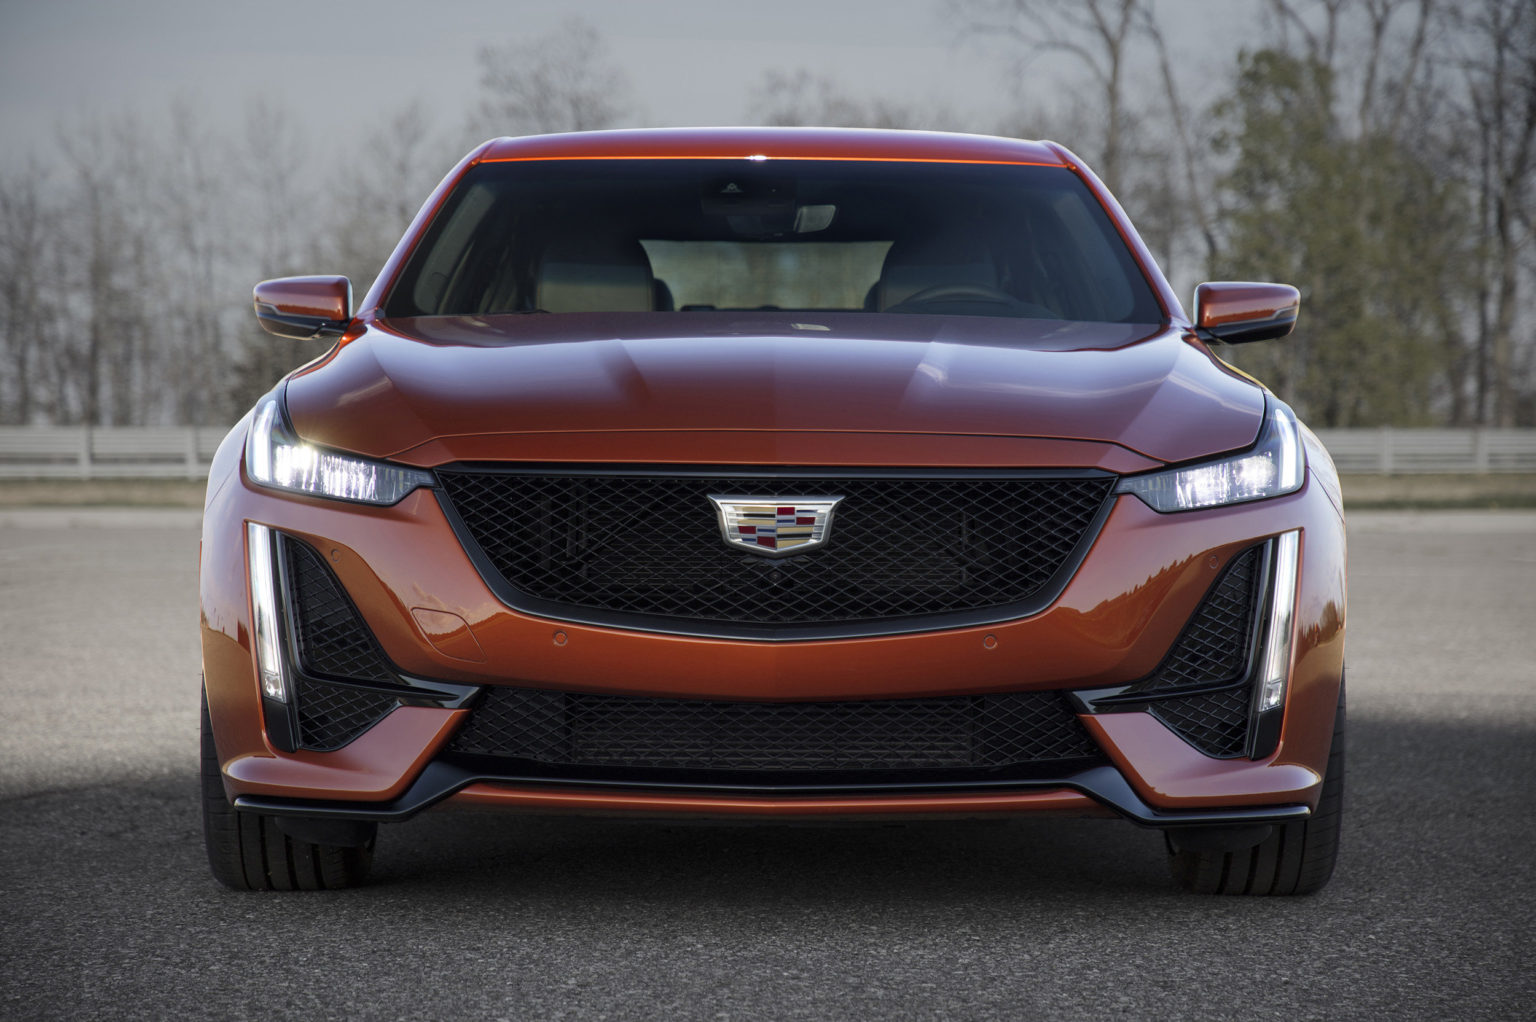 The Cadillac CT5-V is the performance variant of the new 2020 Cadillac CT5 sedan.